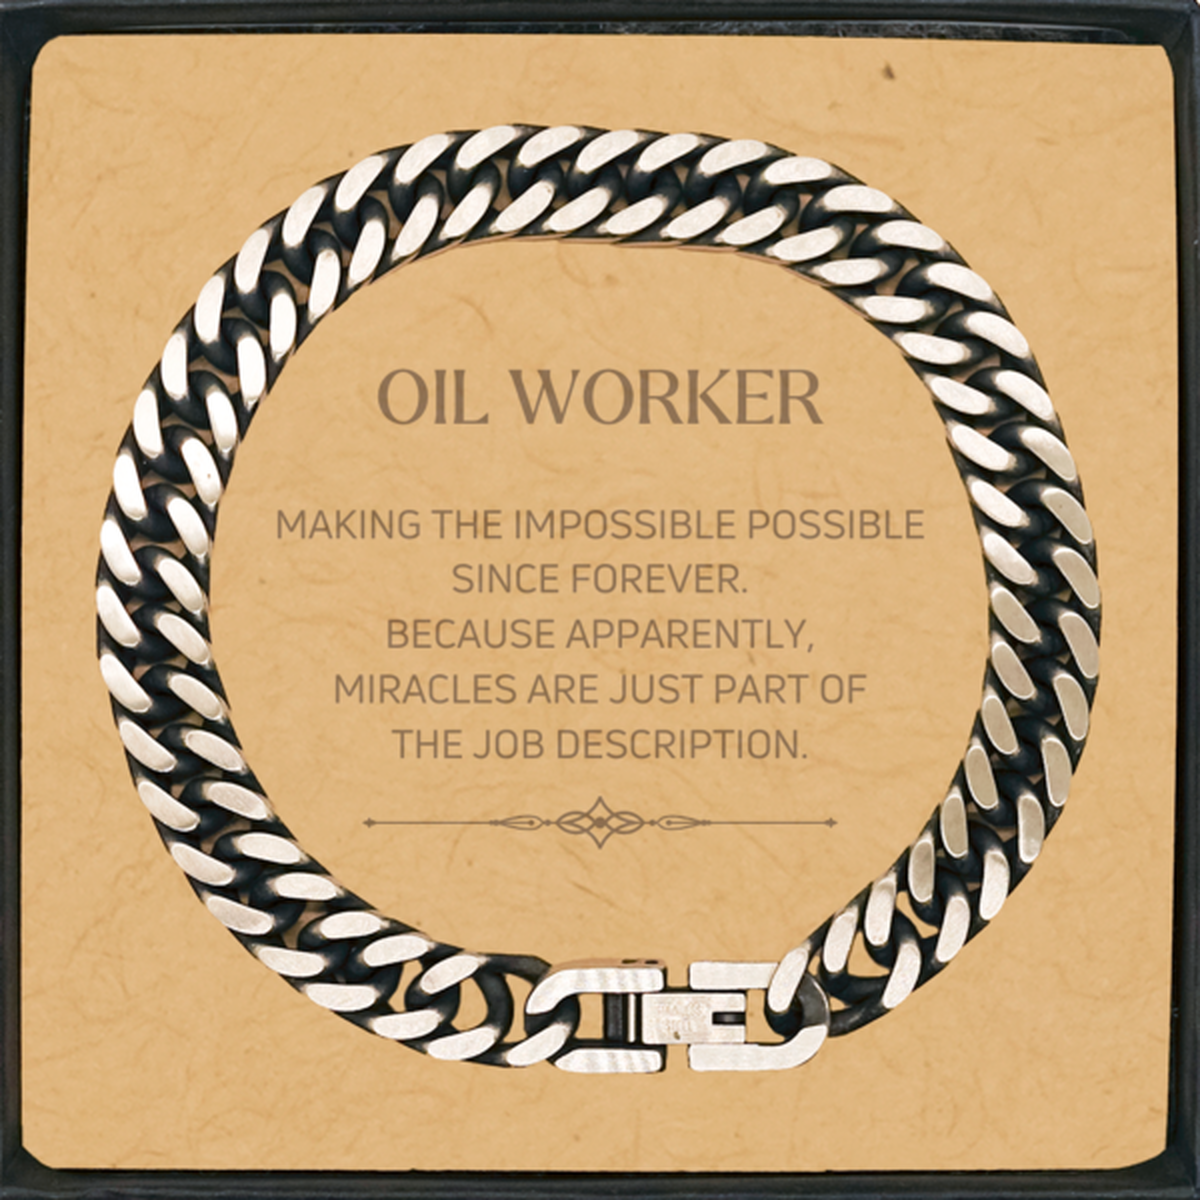 Funny Oil Worker Gifts, Miracles are just part of the job description, Inspirational Birthday Cuban Link Chain Bracelet For Oil Worker, Men, Women, Coworkers, Friends, Boss